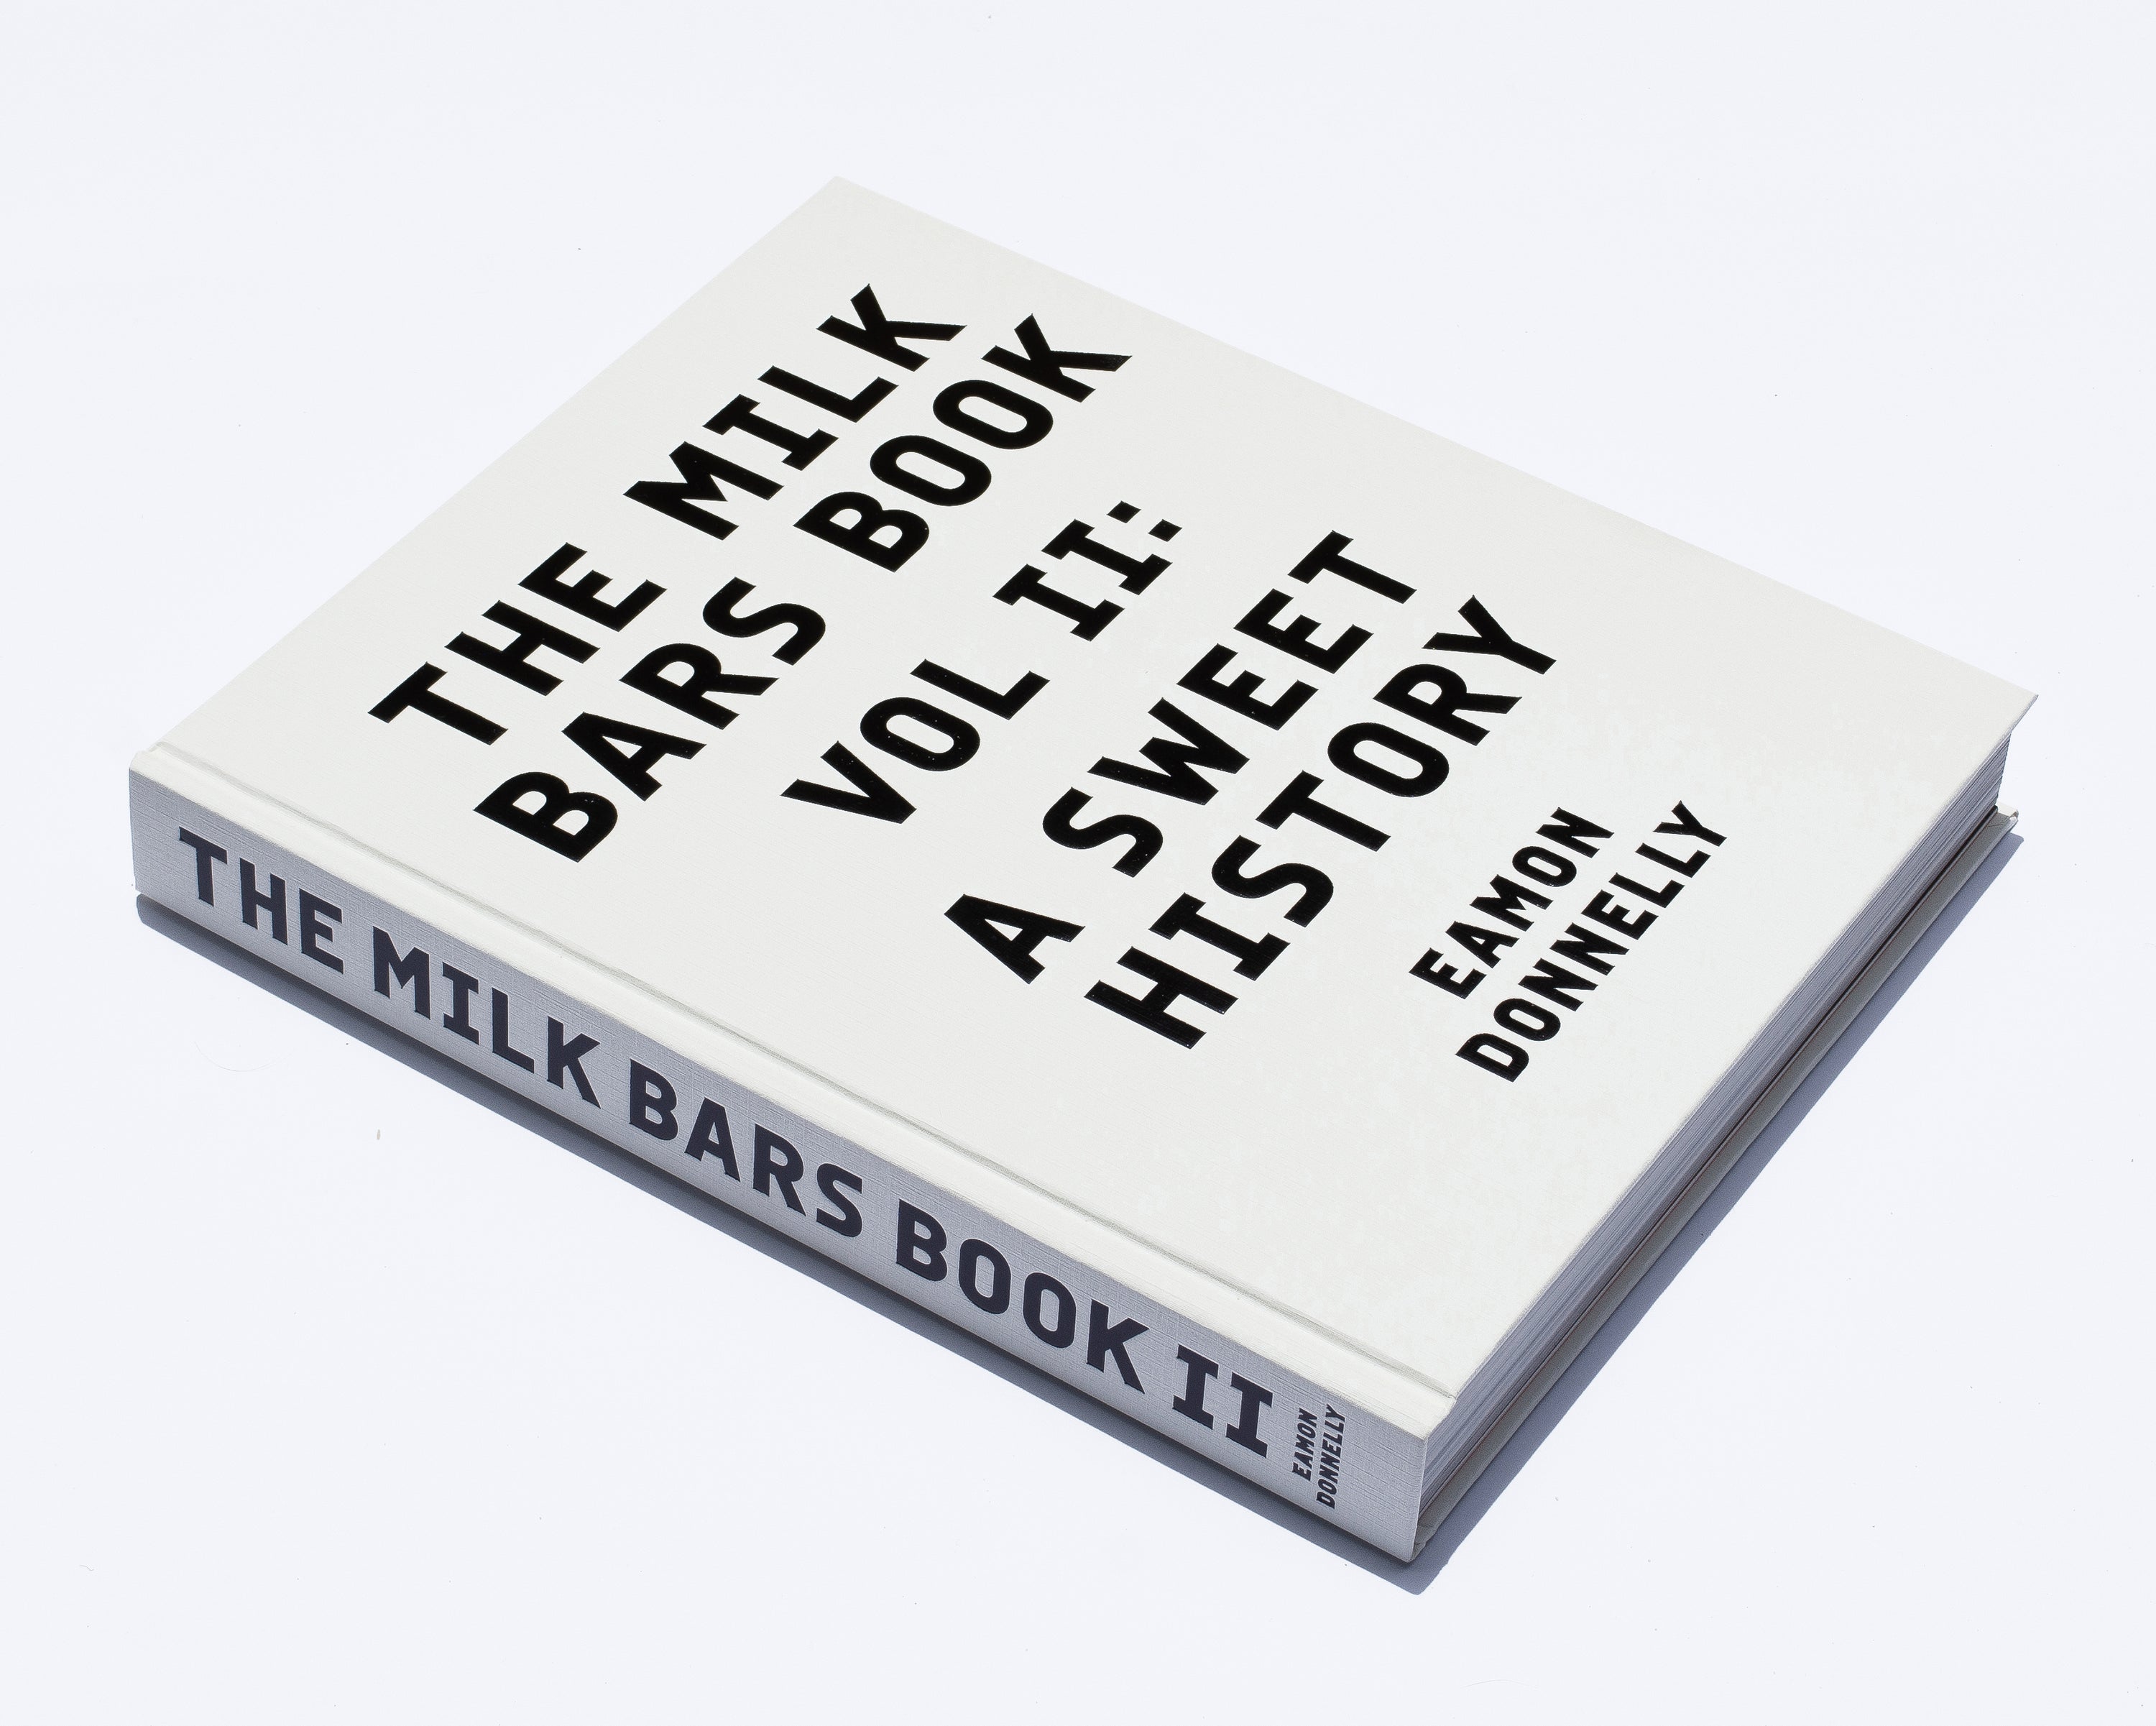 The Milk Bars Book. Volume II: A Sweet History — All Cover Colours Bundle Discount "Collect Them All!"